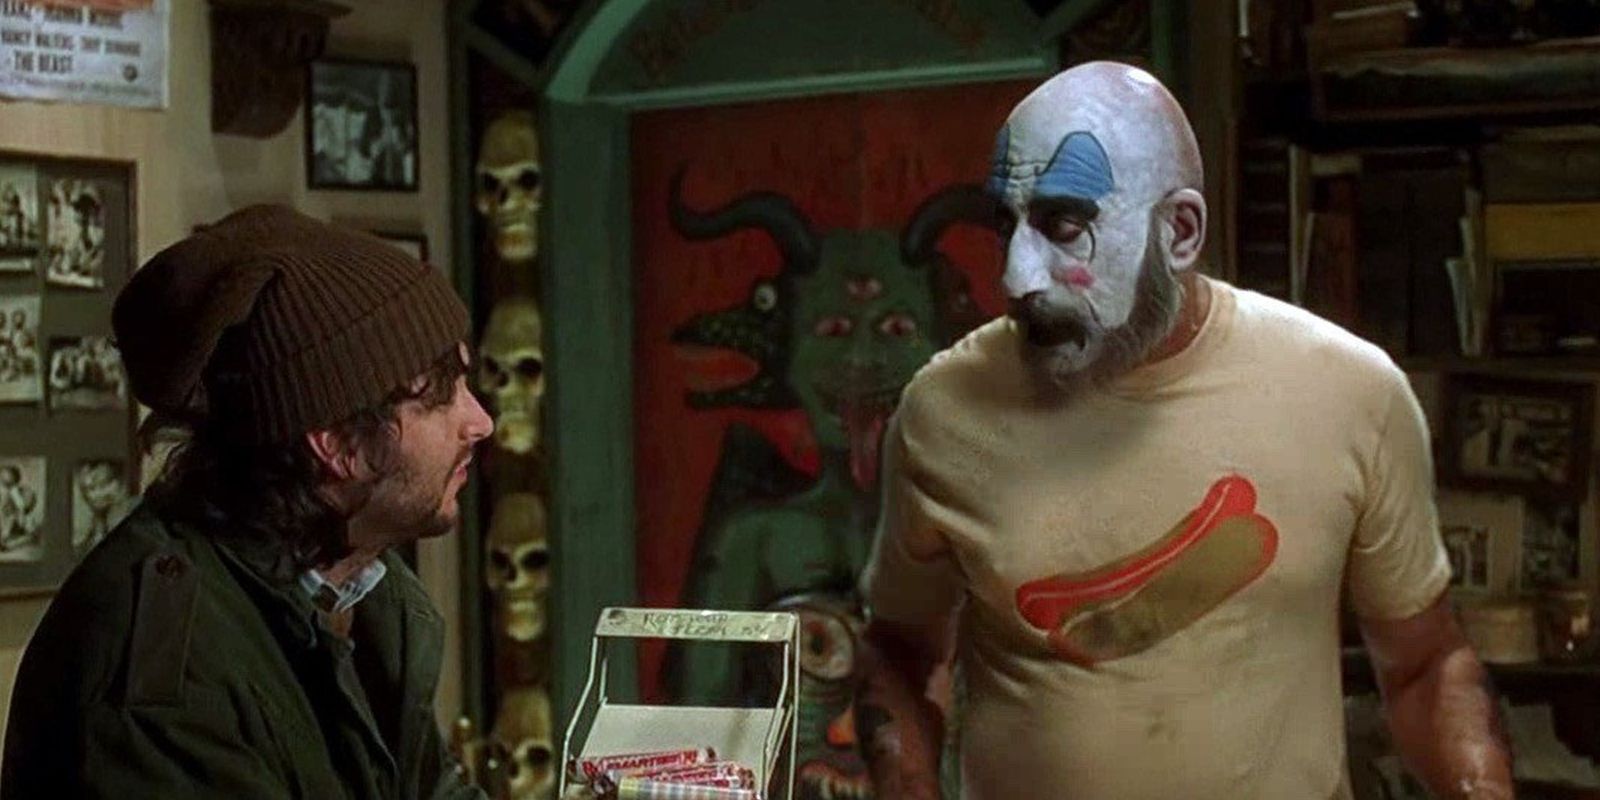 The Devil's Rejects: Captain Spaulding in a store.